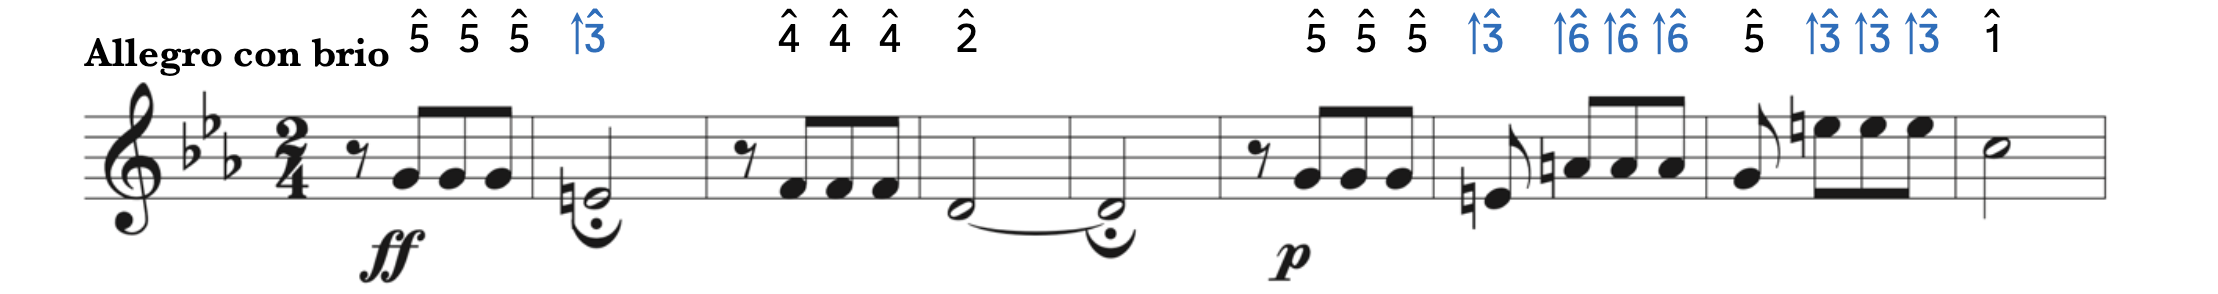 The first nine bars of Beethoven's Symphony No. 5 in C Minor, Op. 67, first movement – Allegro con brio rewritten in the parallel major. Scale degrees 6 and 3 are raised.